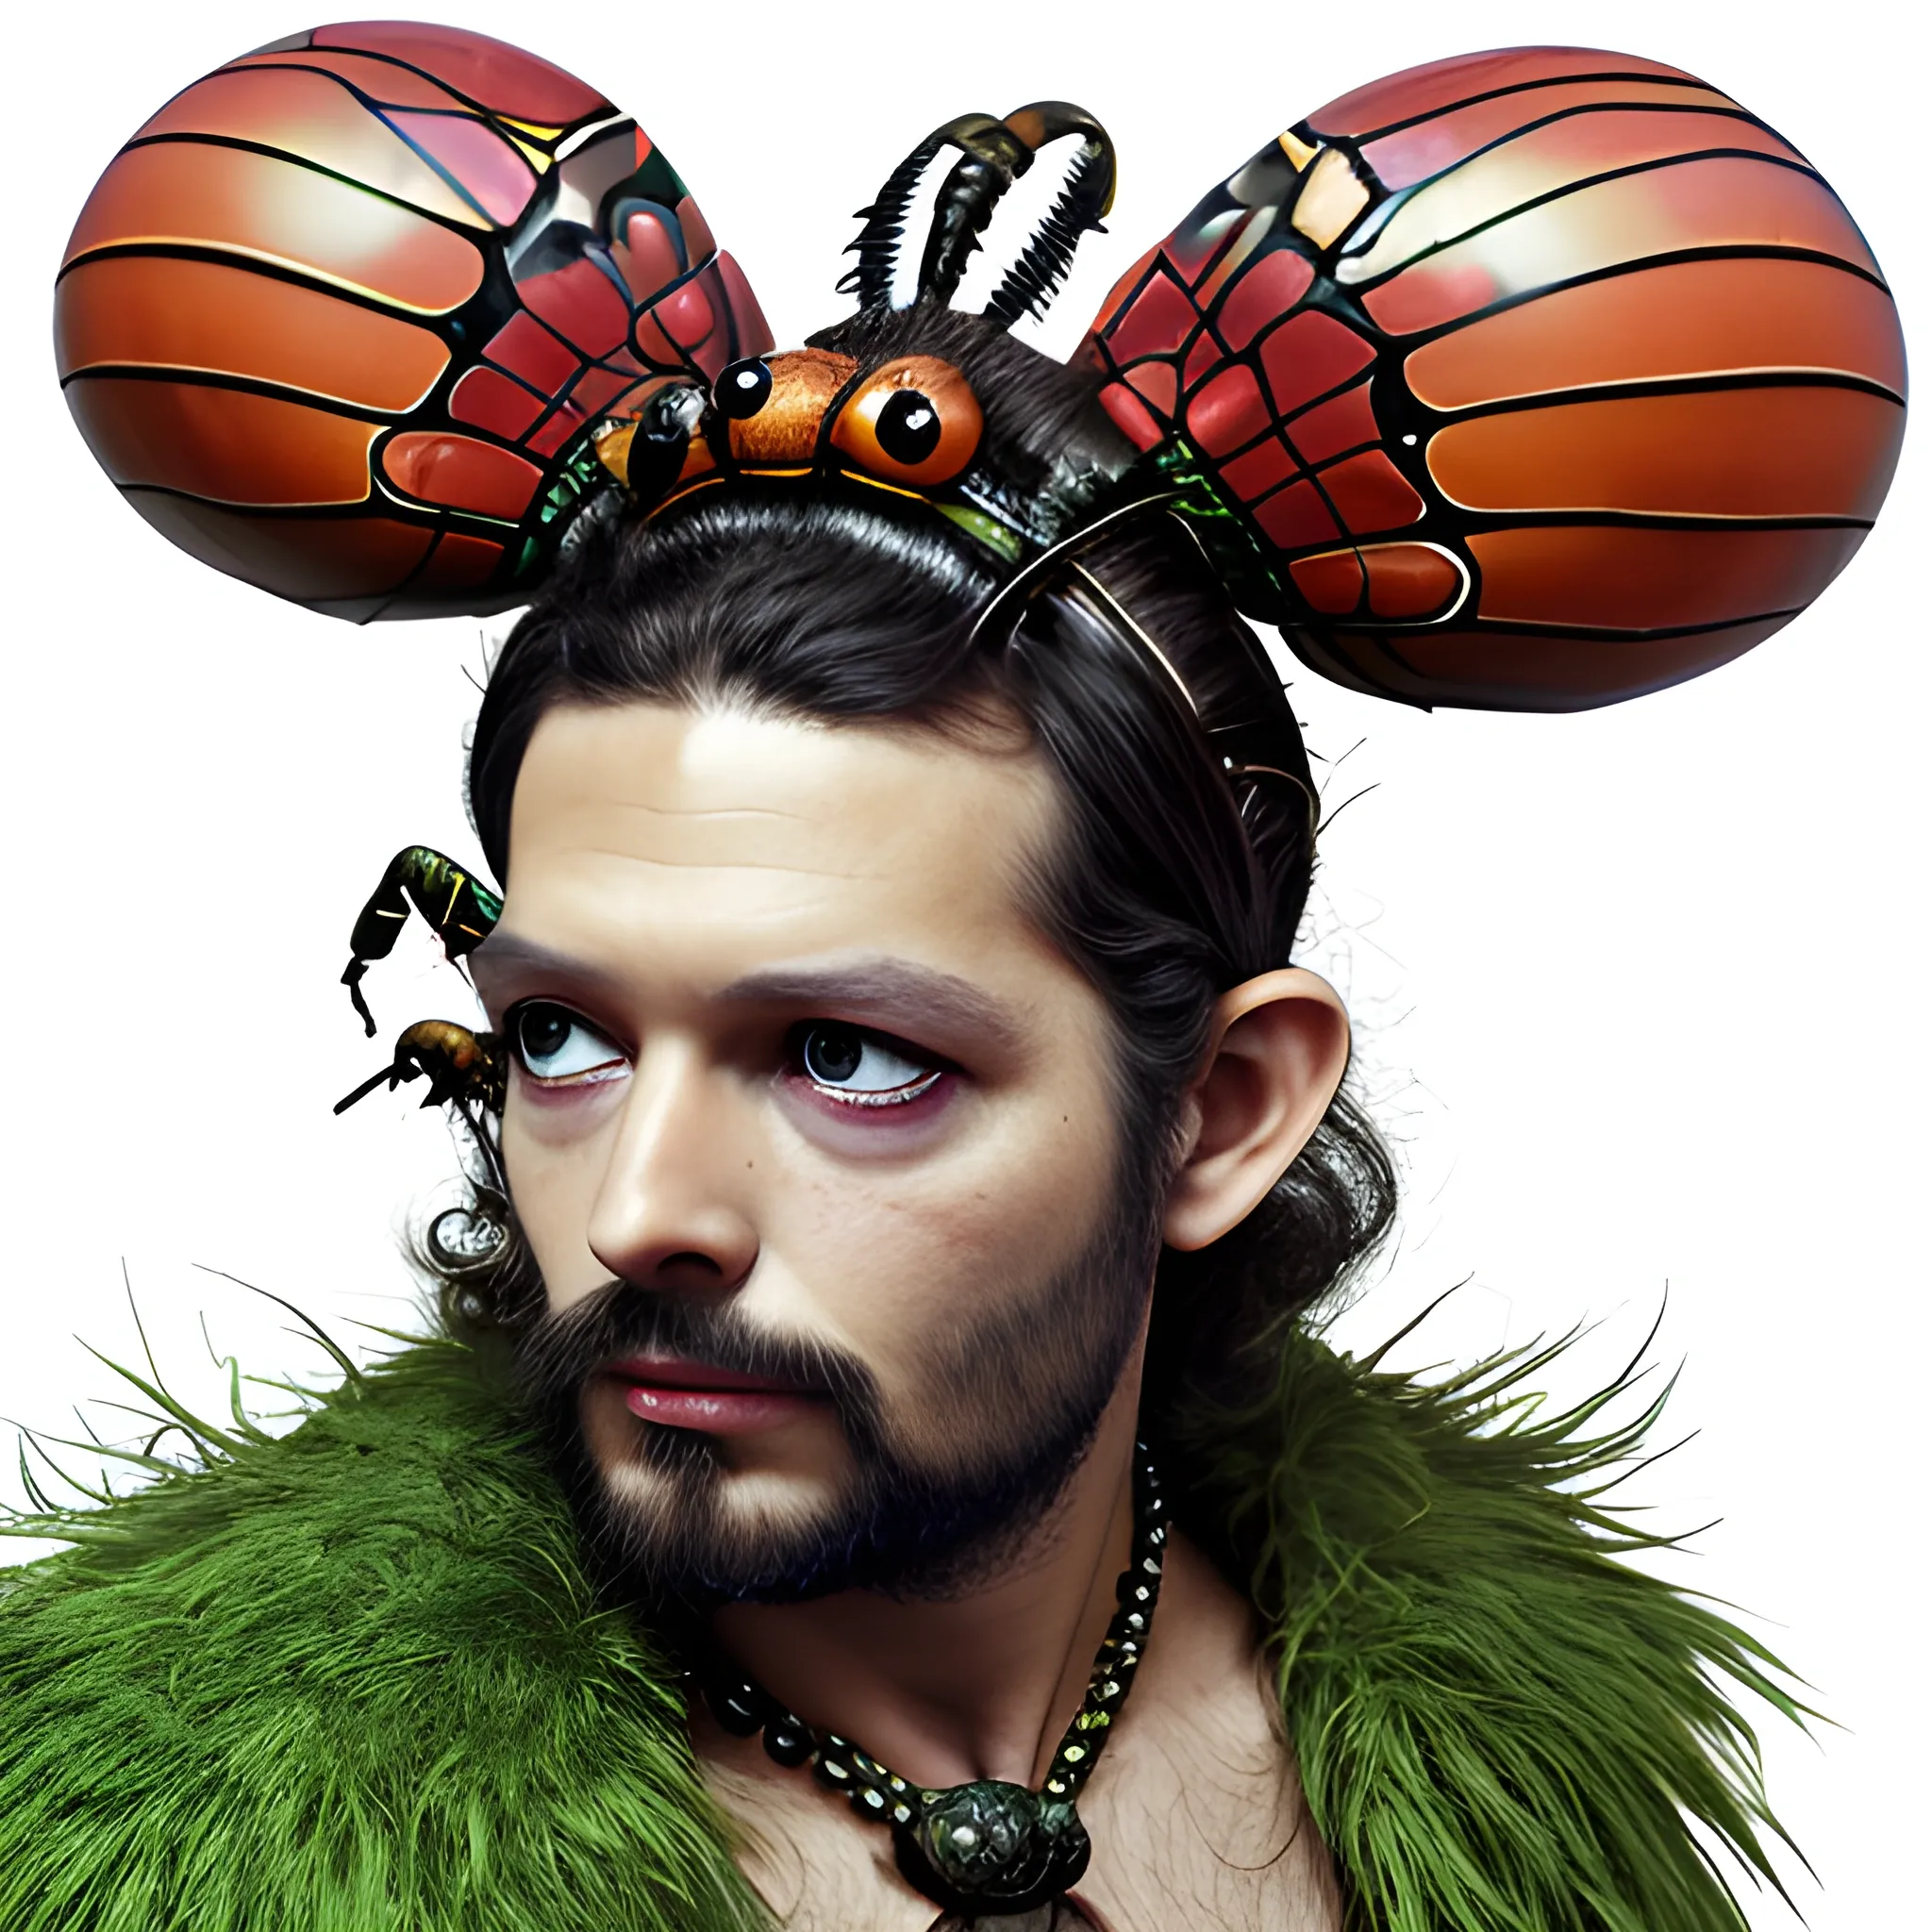 70s fantasy insect monster attached to man's head

